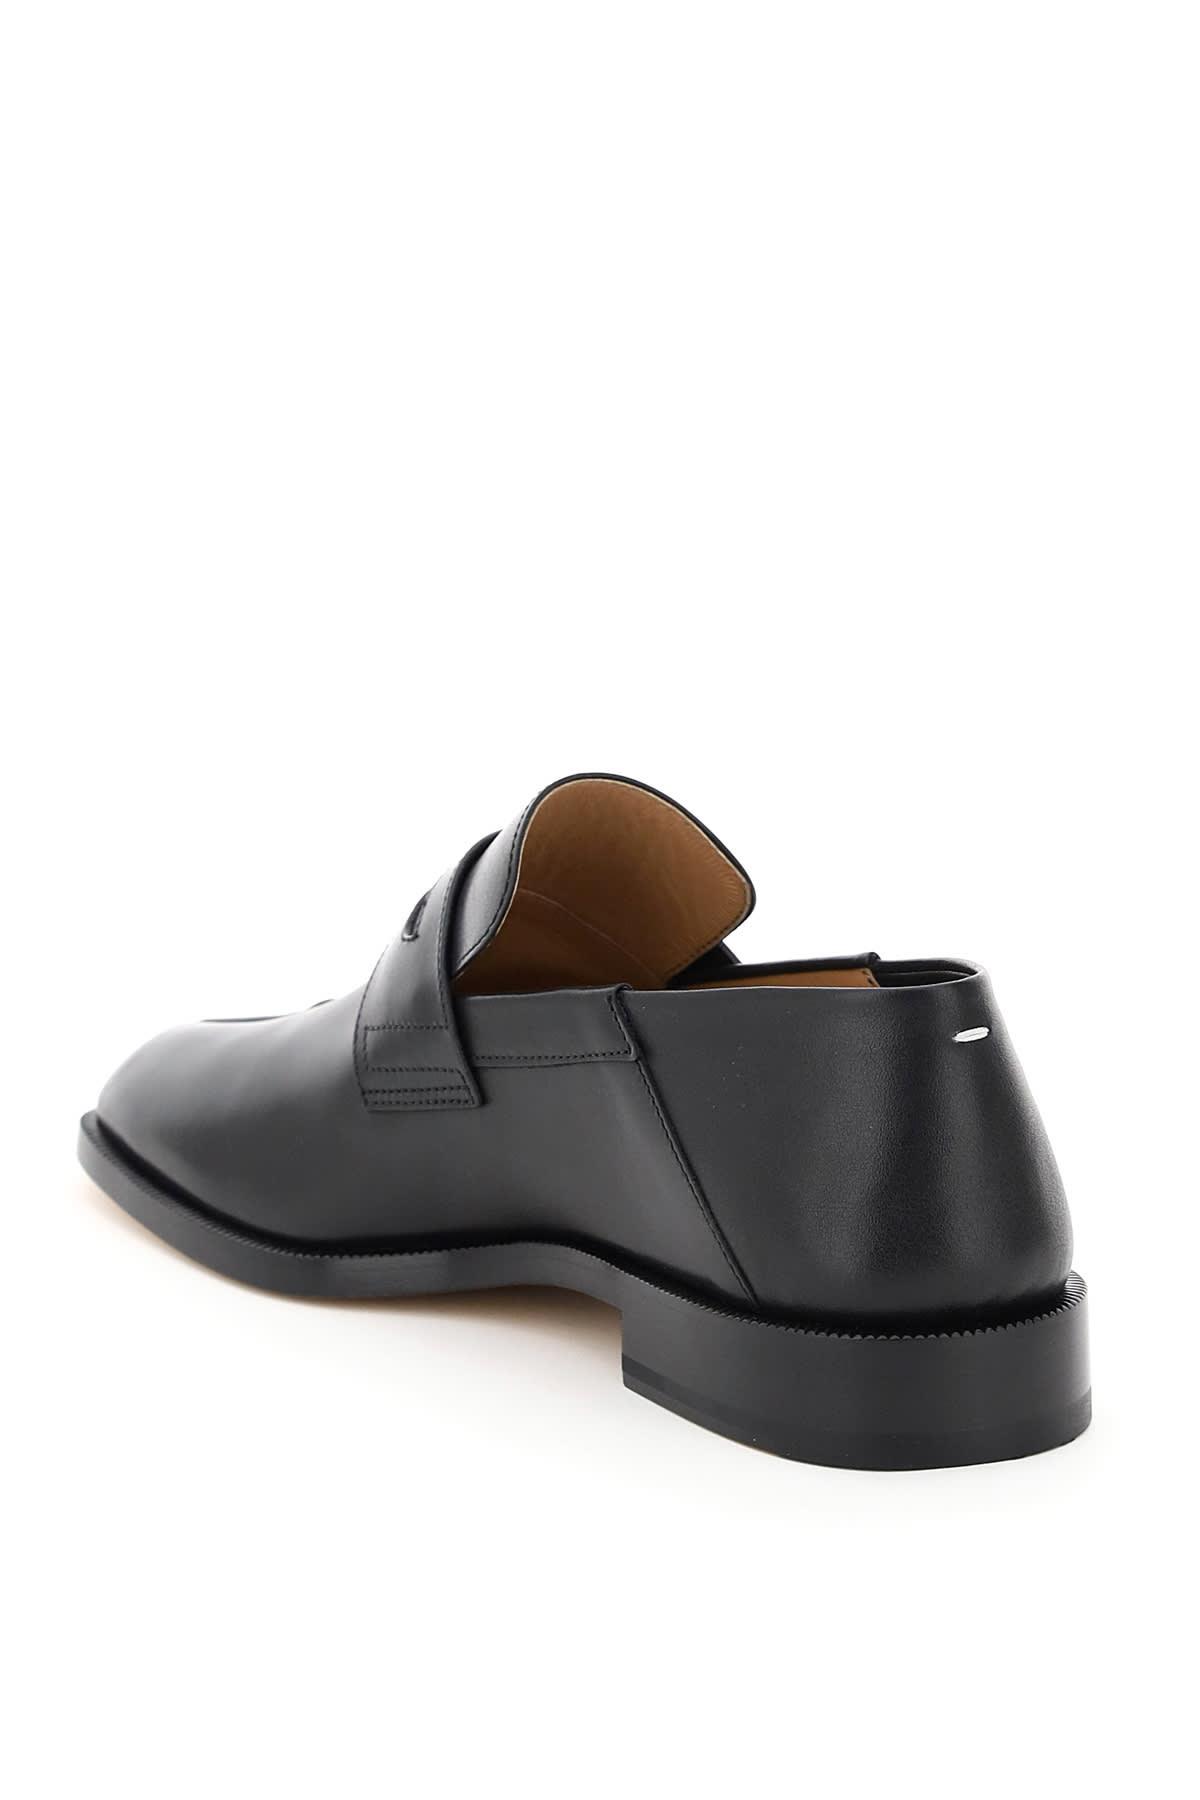 Maison Margiela Leather Tabi Loafers for Men | Lyst